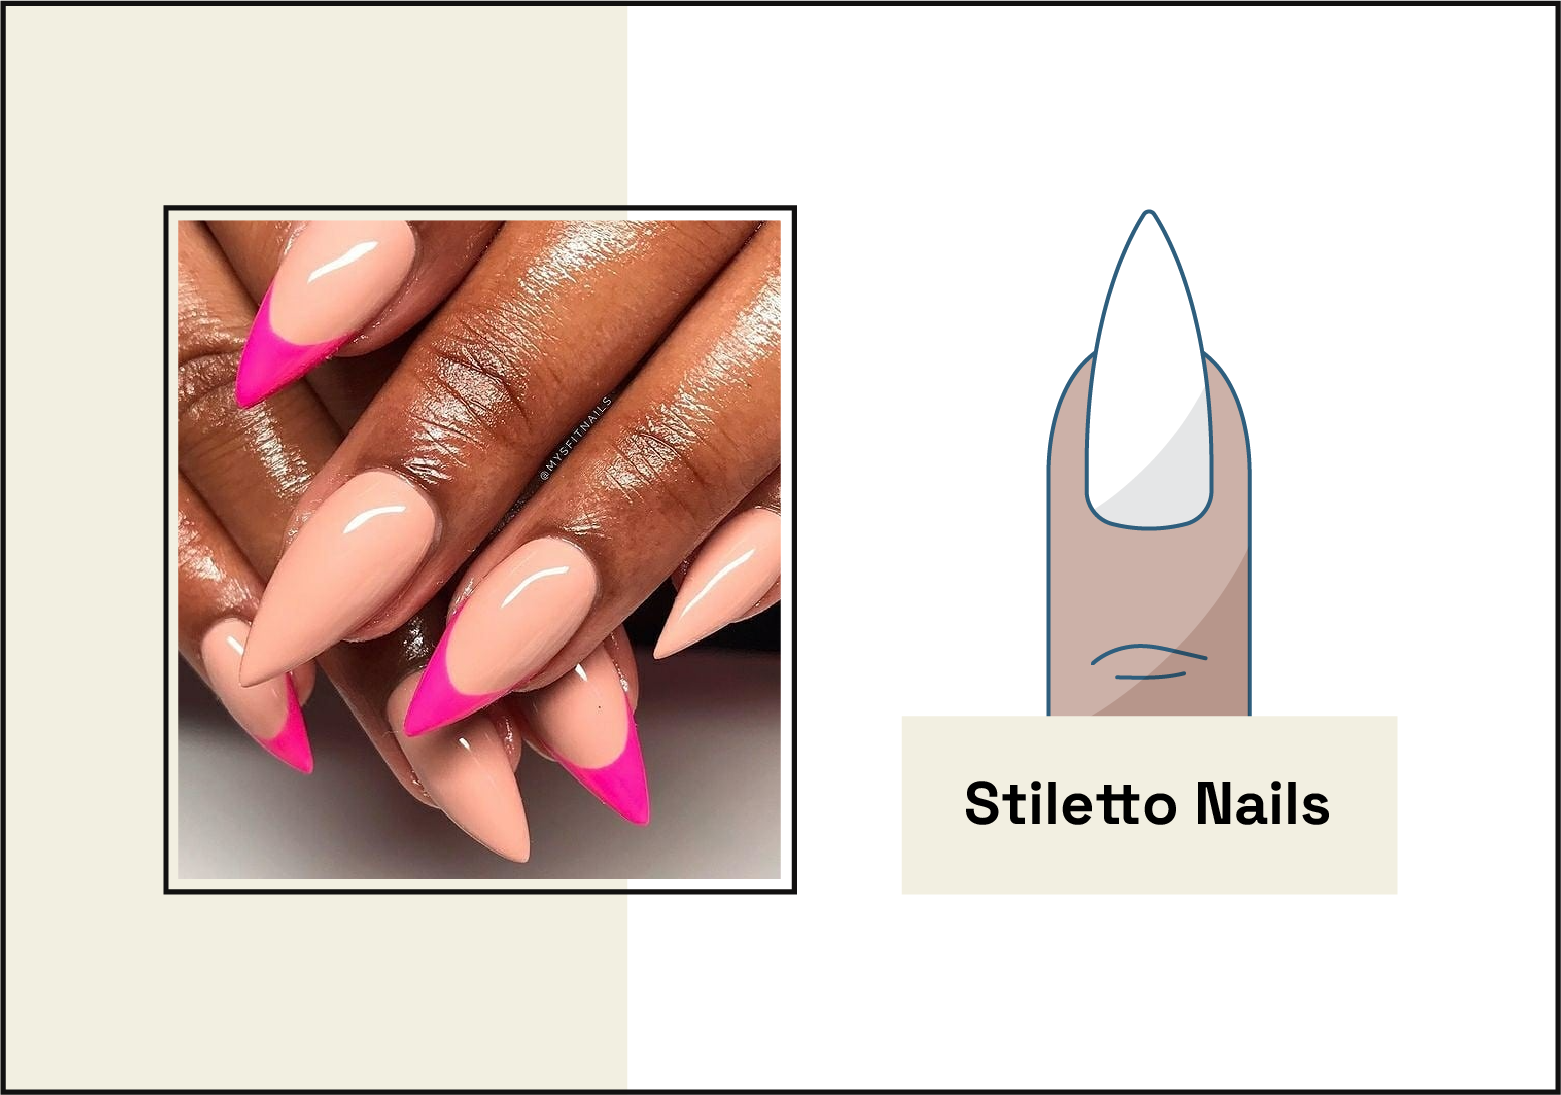 photo of manicure with pink and hot pink stiletto-shaped nails on the left, illustration of the stiletto nail shape on the right